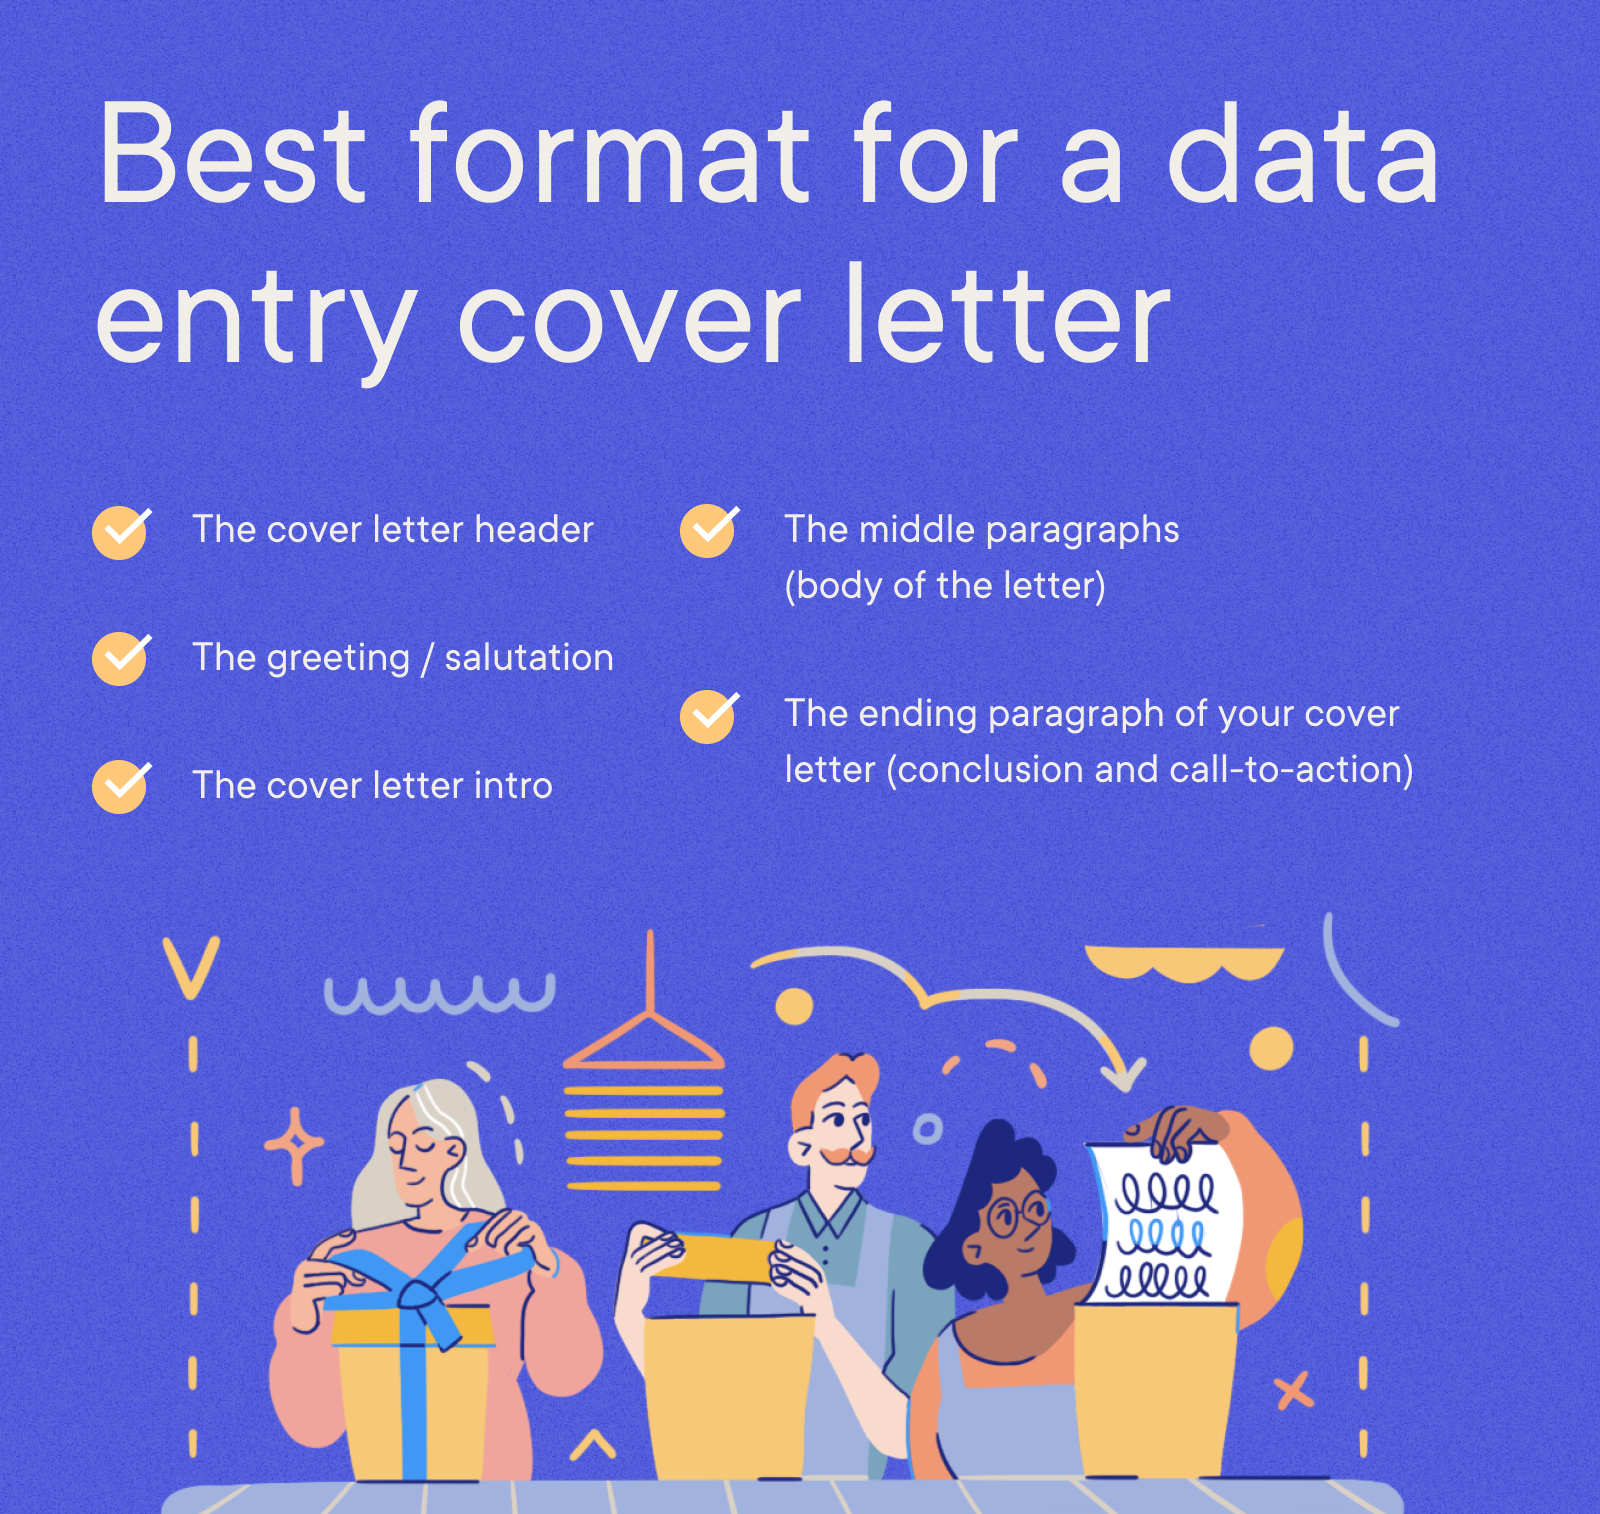 Data Entry - Best format for a data entry cover letter